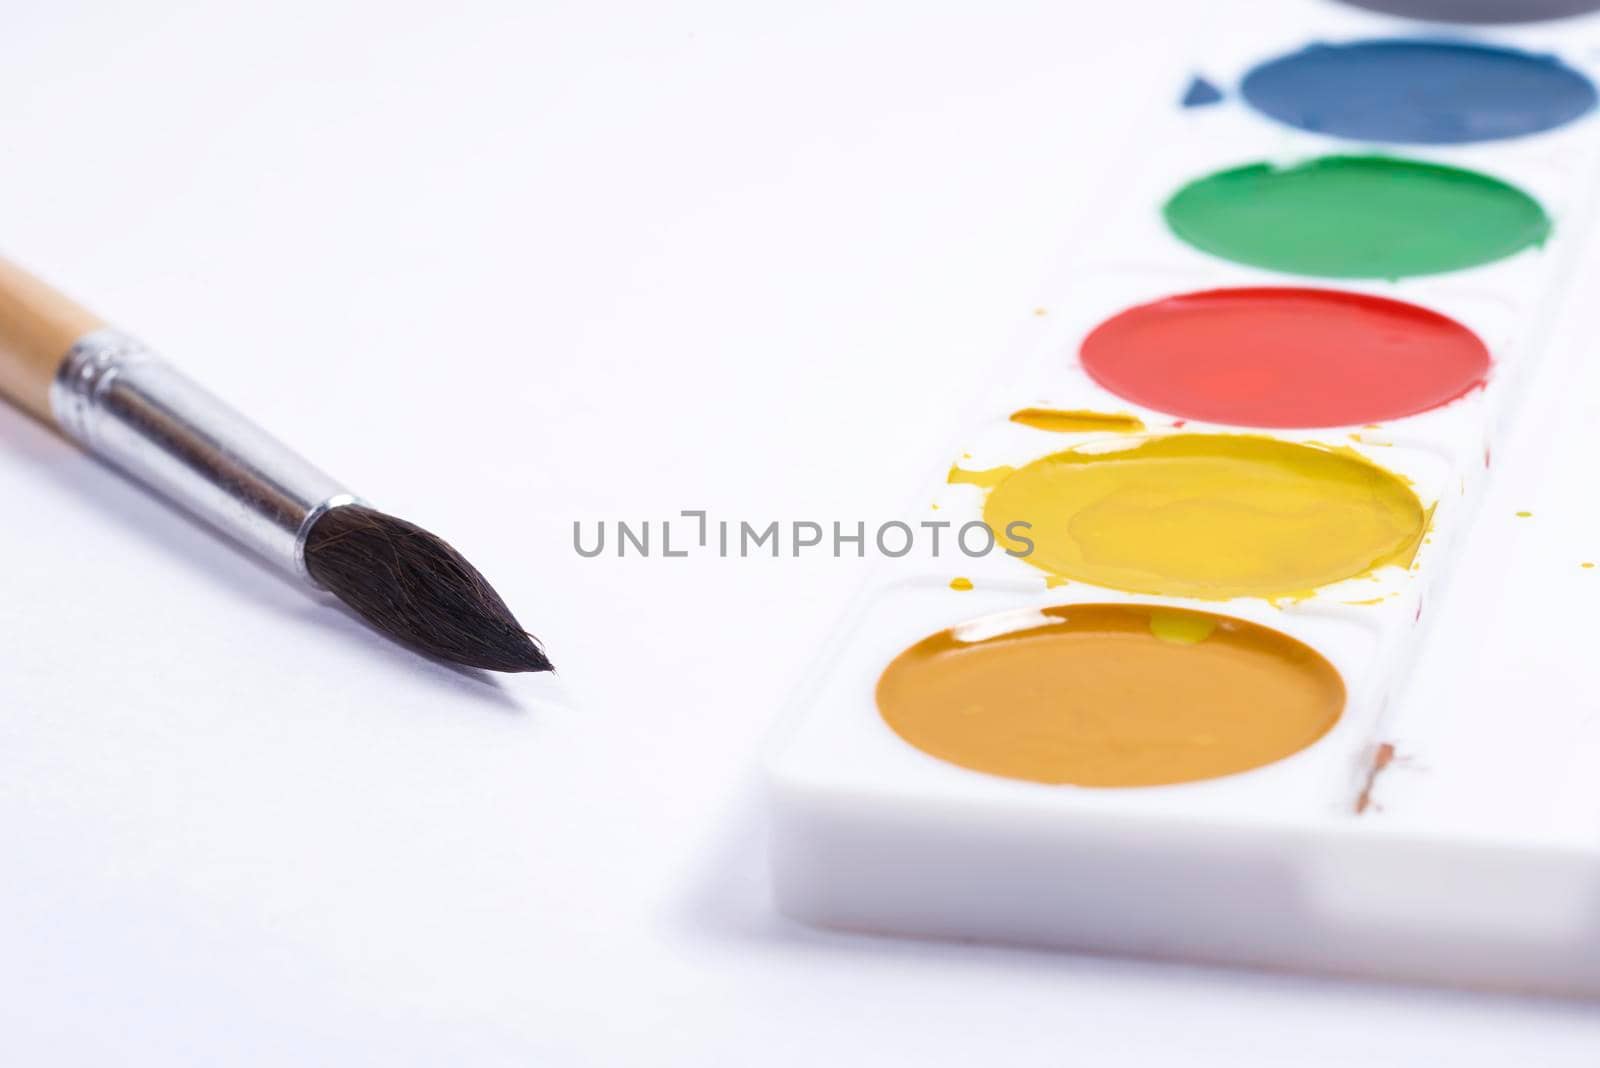 Colorful watercolor palette, top view of paintbrushes palette with brush on white paper background